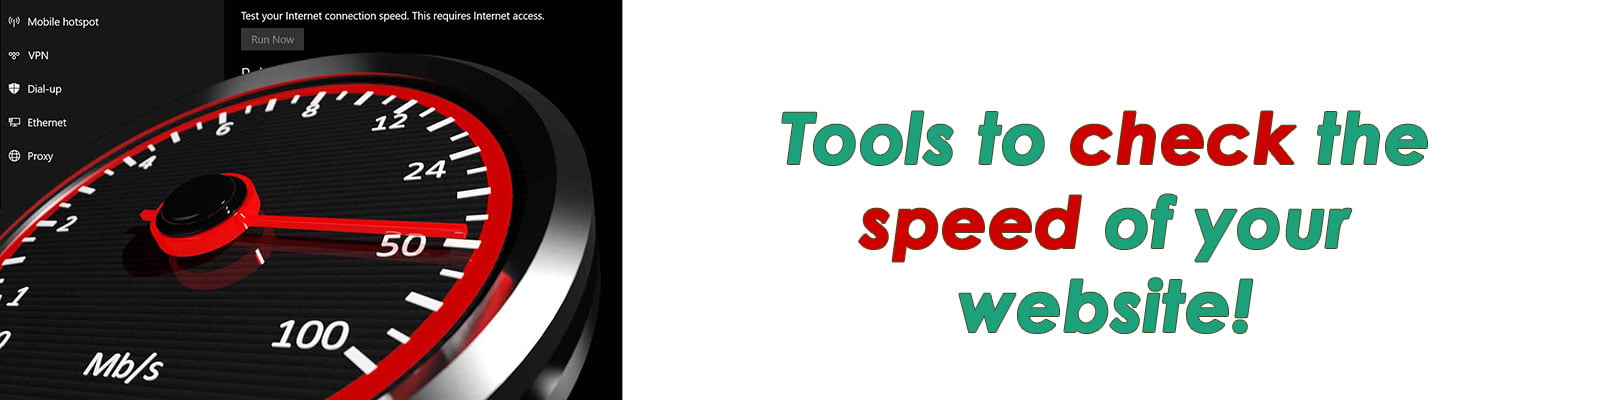 7 Ways/Tools to check the speed of your website?